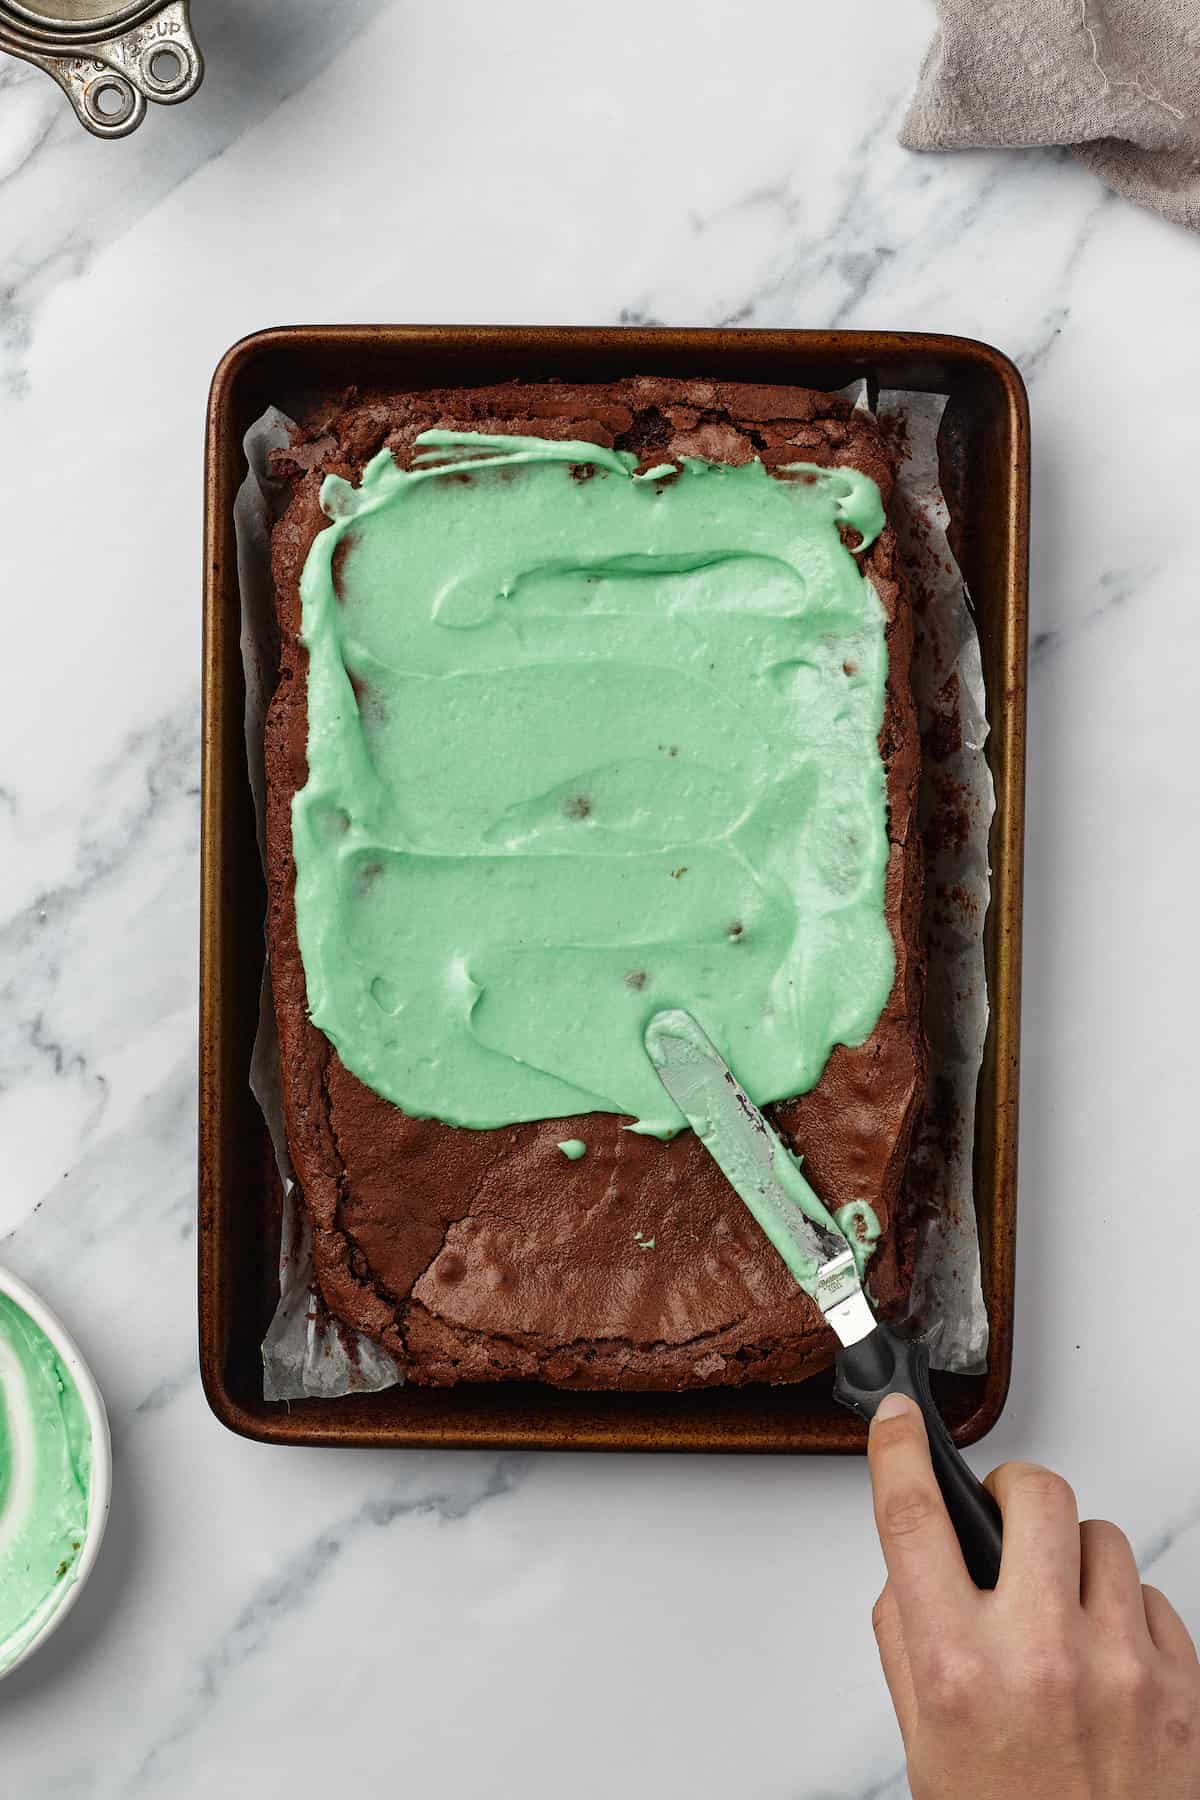 Mint frosting being spread onto a cooled batch of brownies